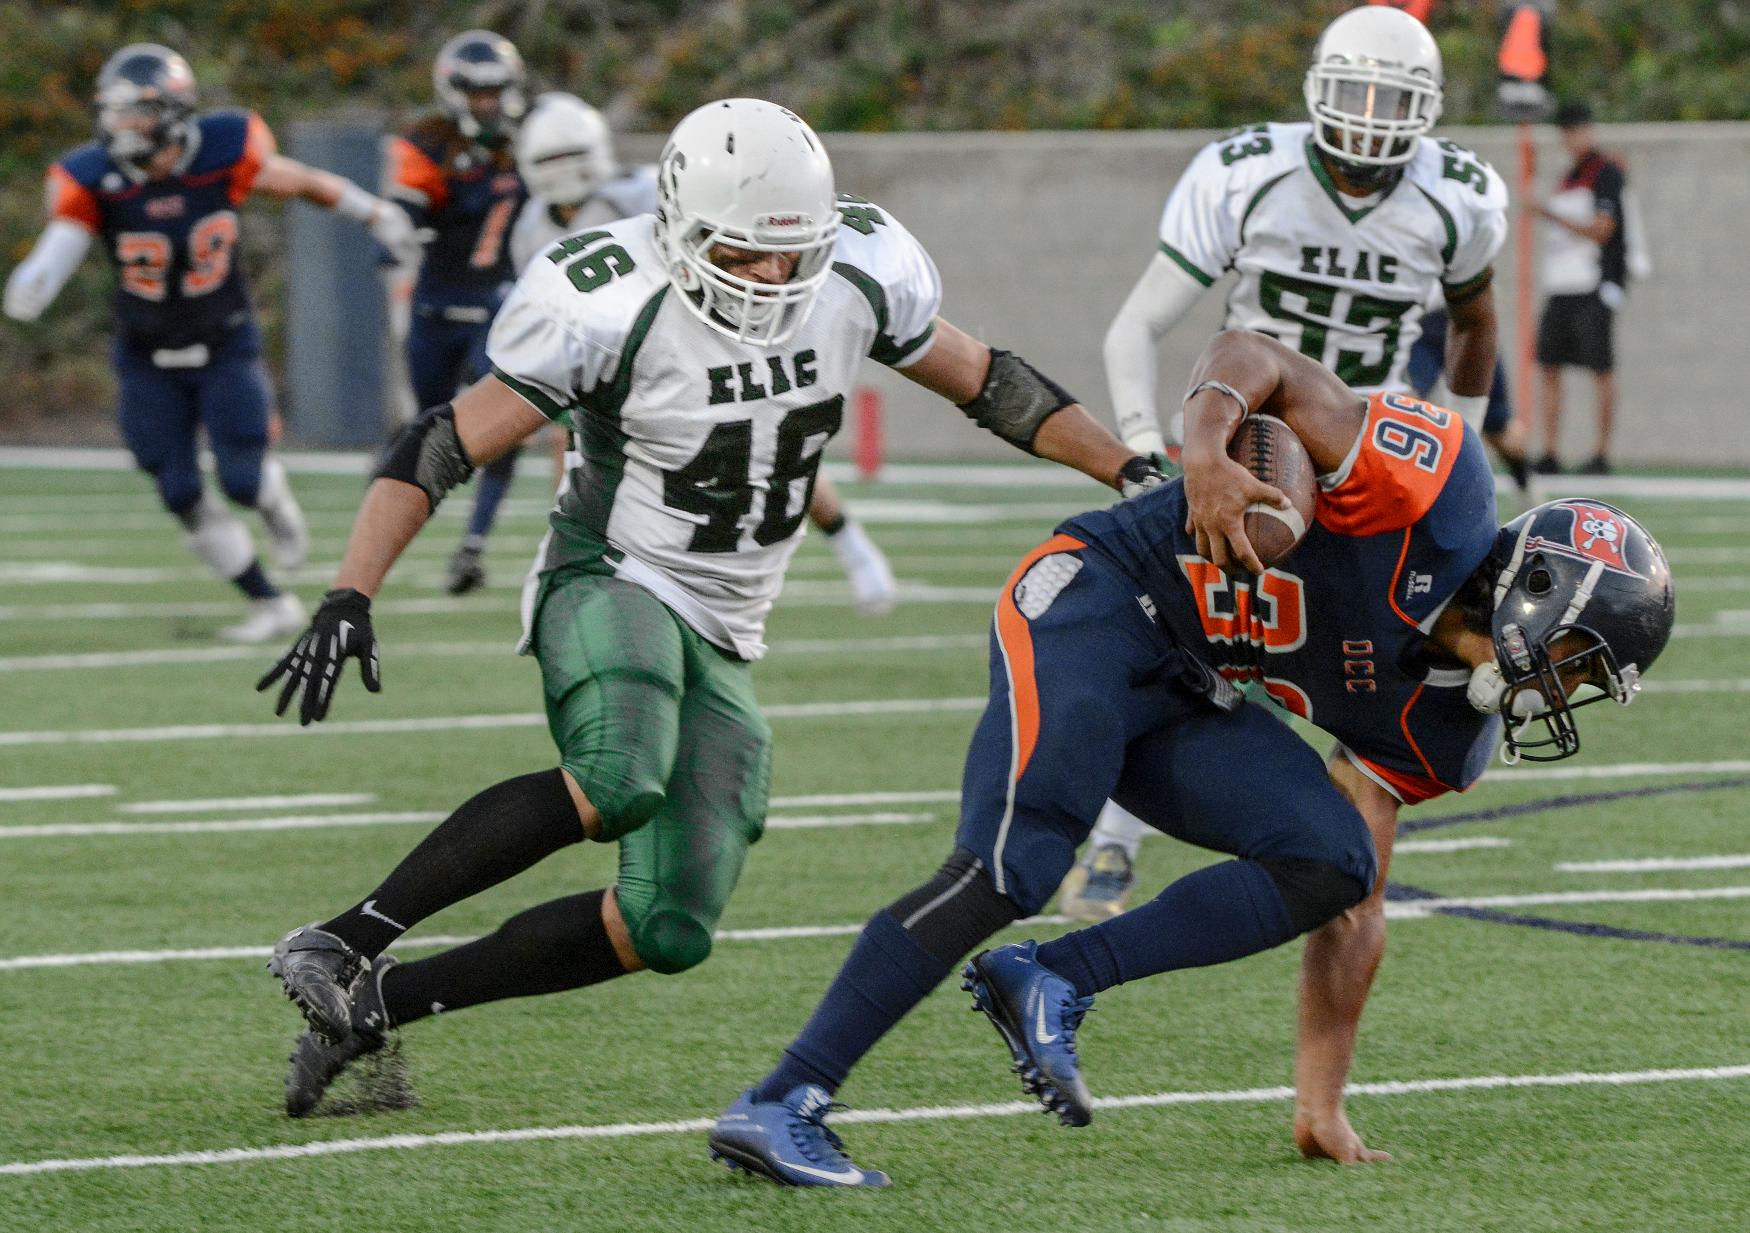 East Los Angeles College sophomore linebacker Anthony Perez (No. 46) reaches out to tackle Orange Coast College freshman running back John Simon as sophomore running back Vaquel Junious Brown looks on in a 27-3 ELAC loss to the Pirates on Sept. 3. (Photo by Tadzio Garcia)